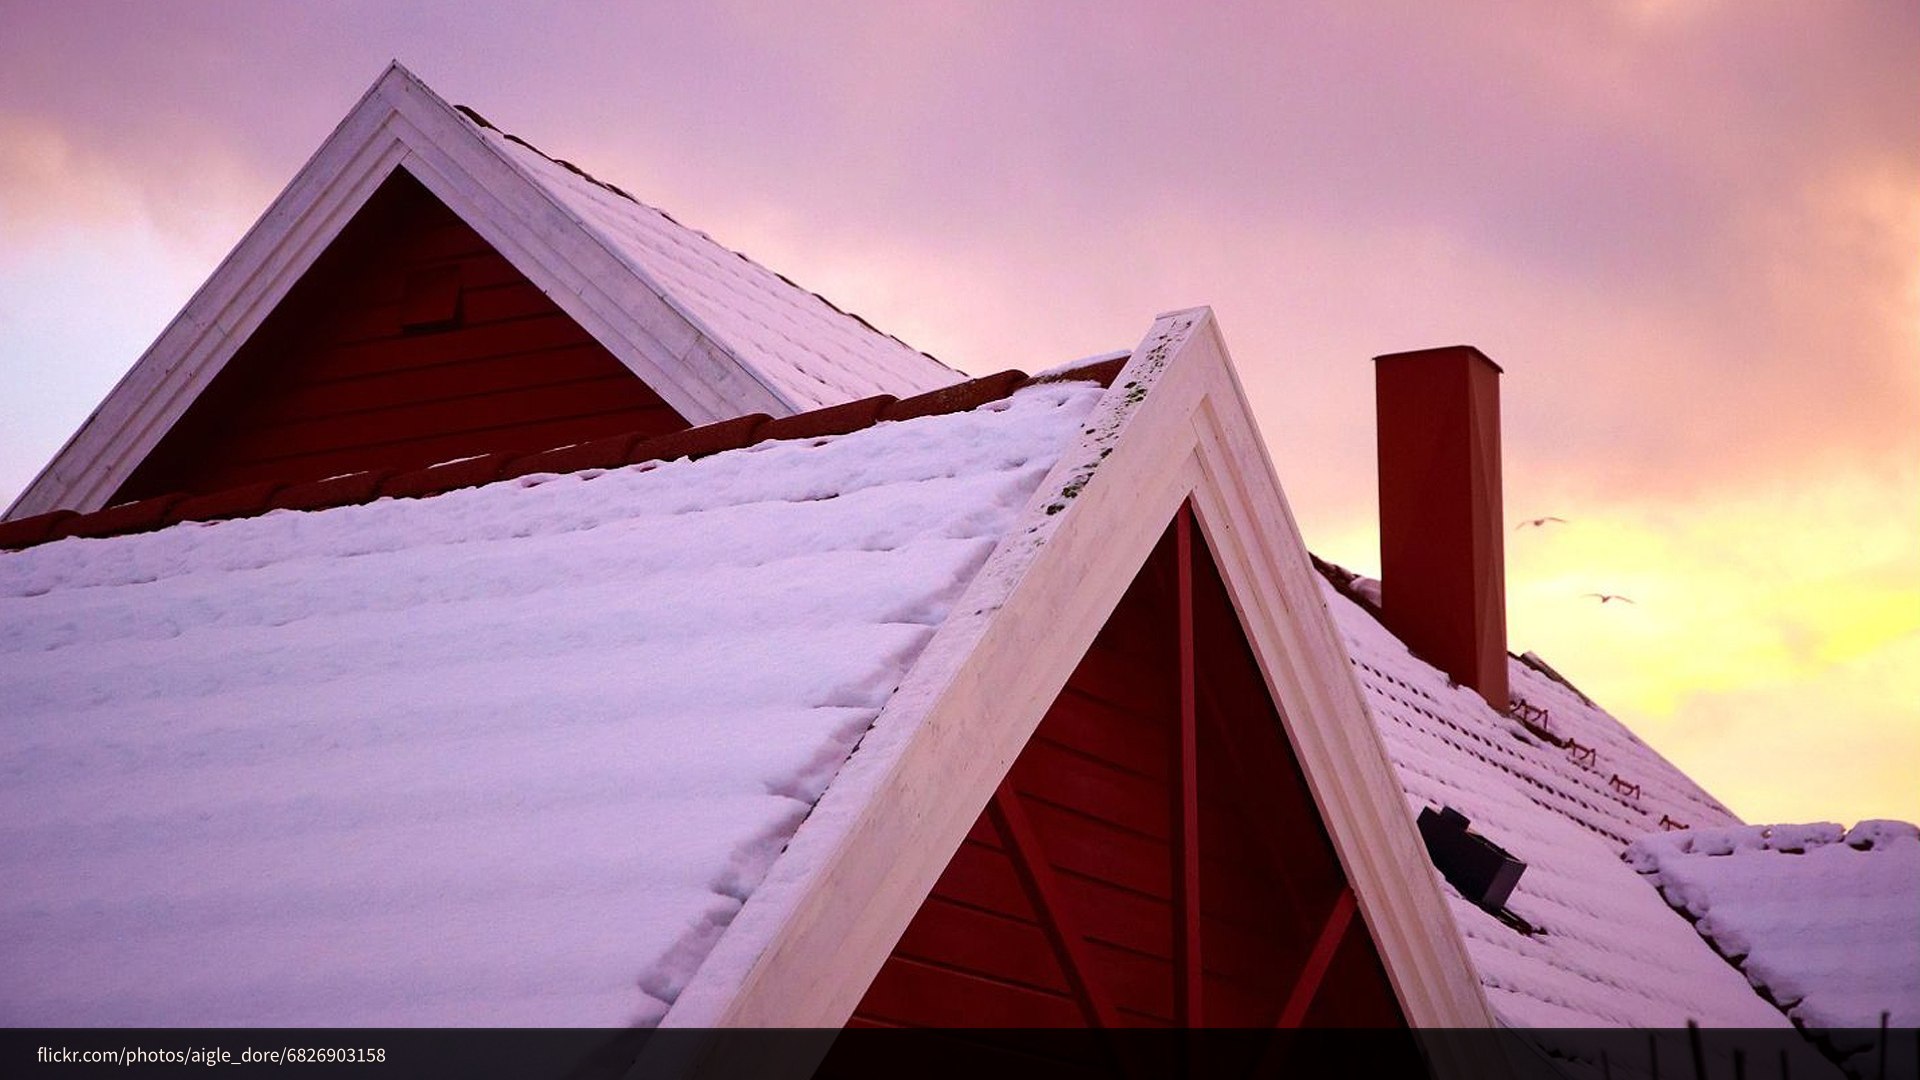 A photograph of a snow-covered roof